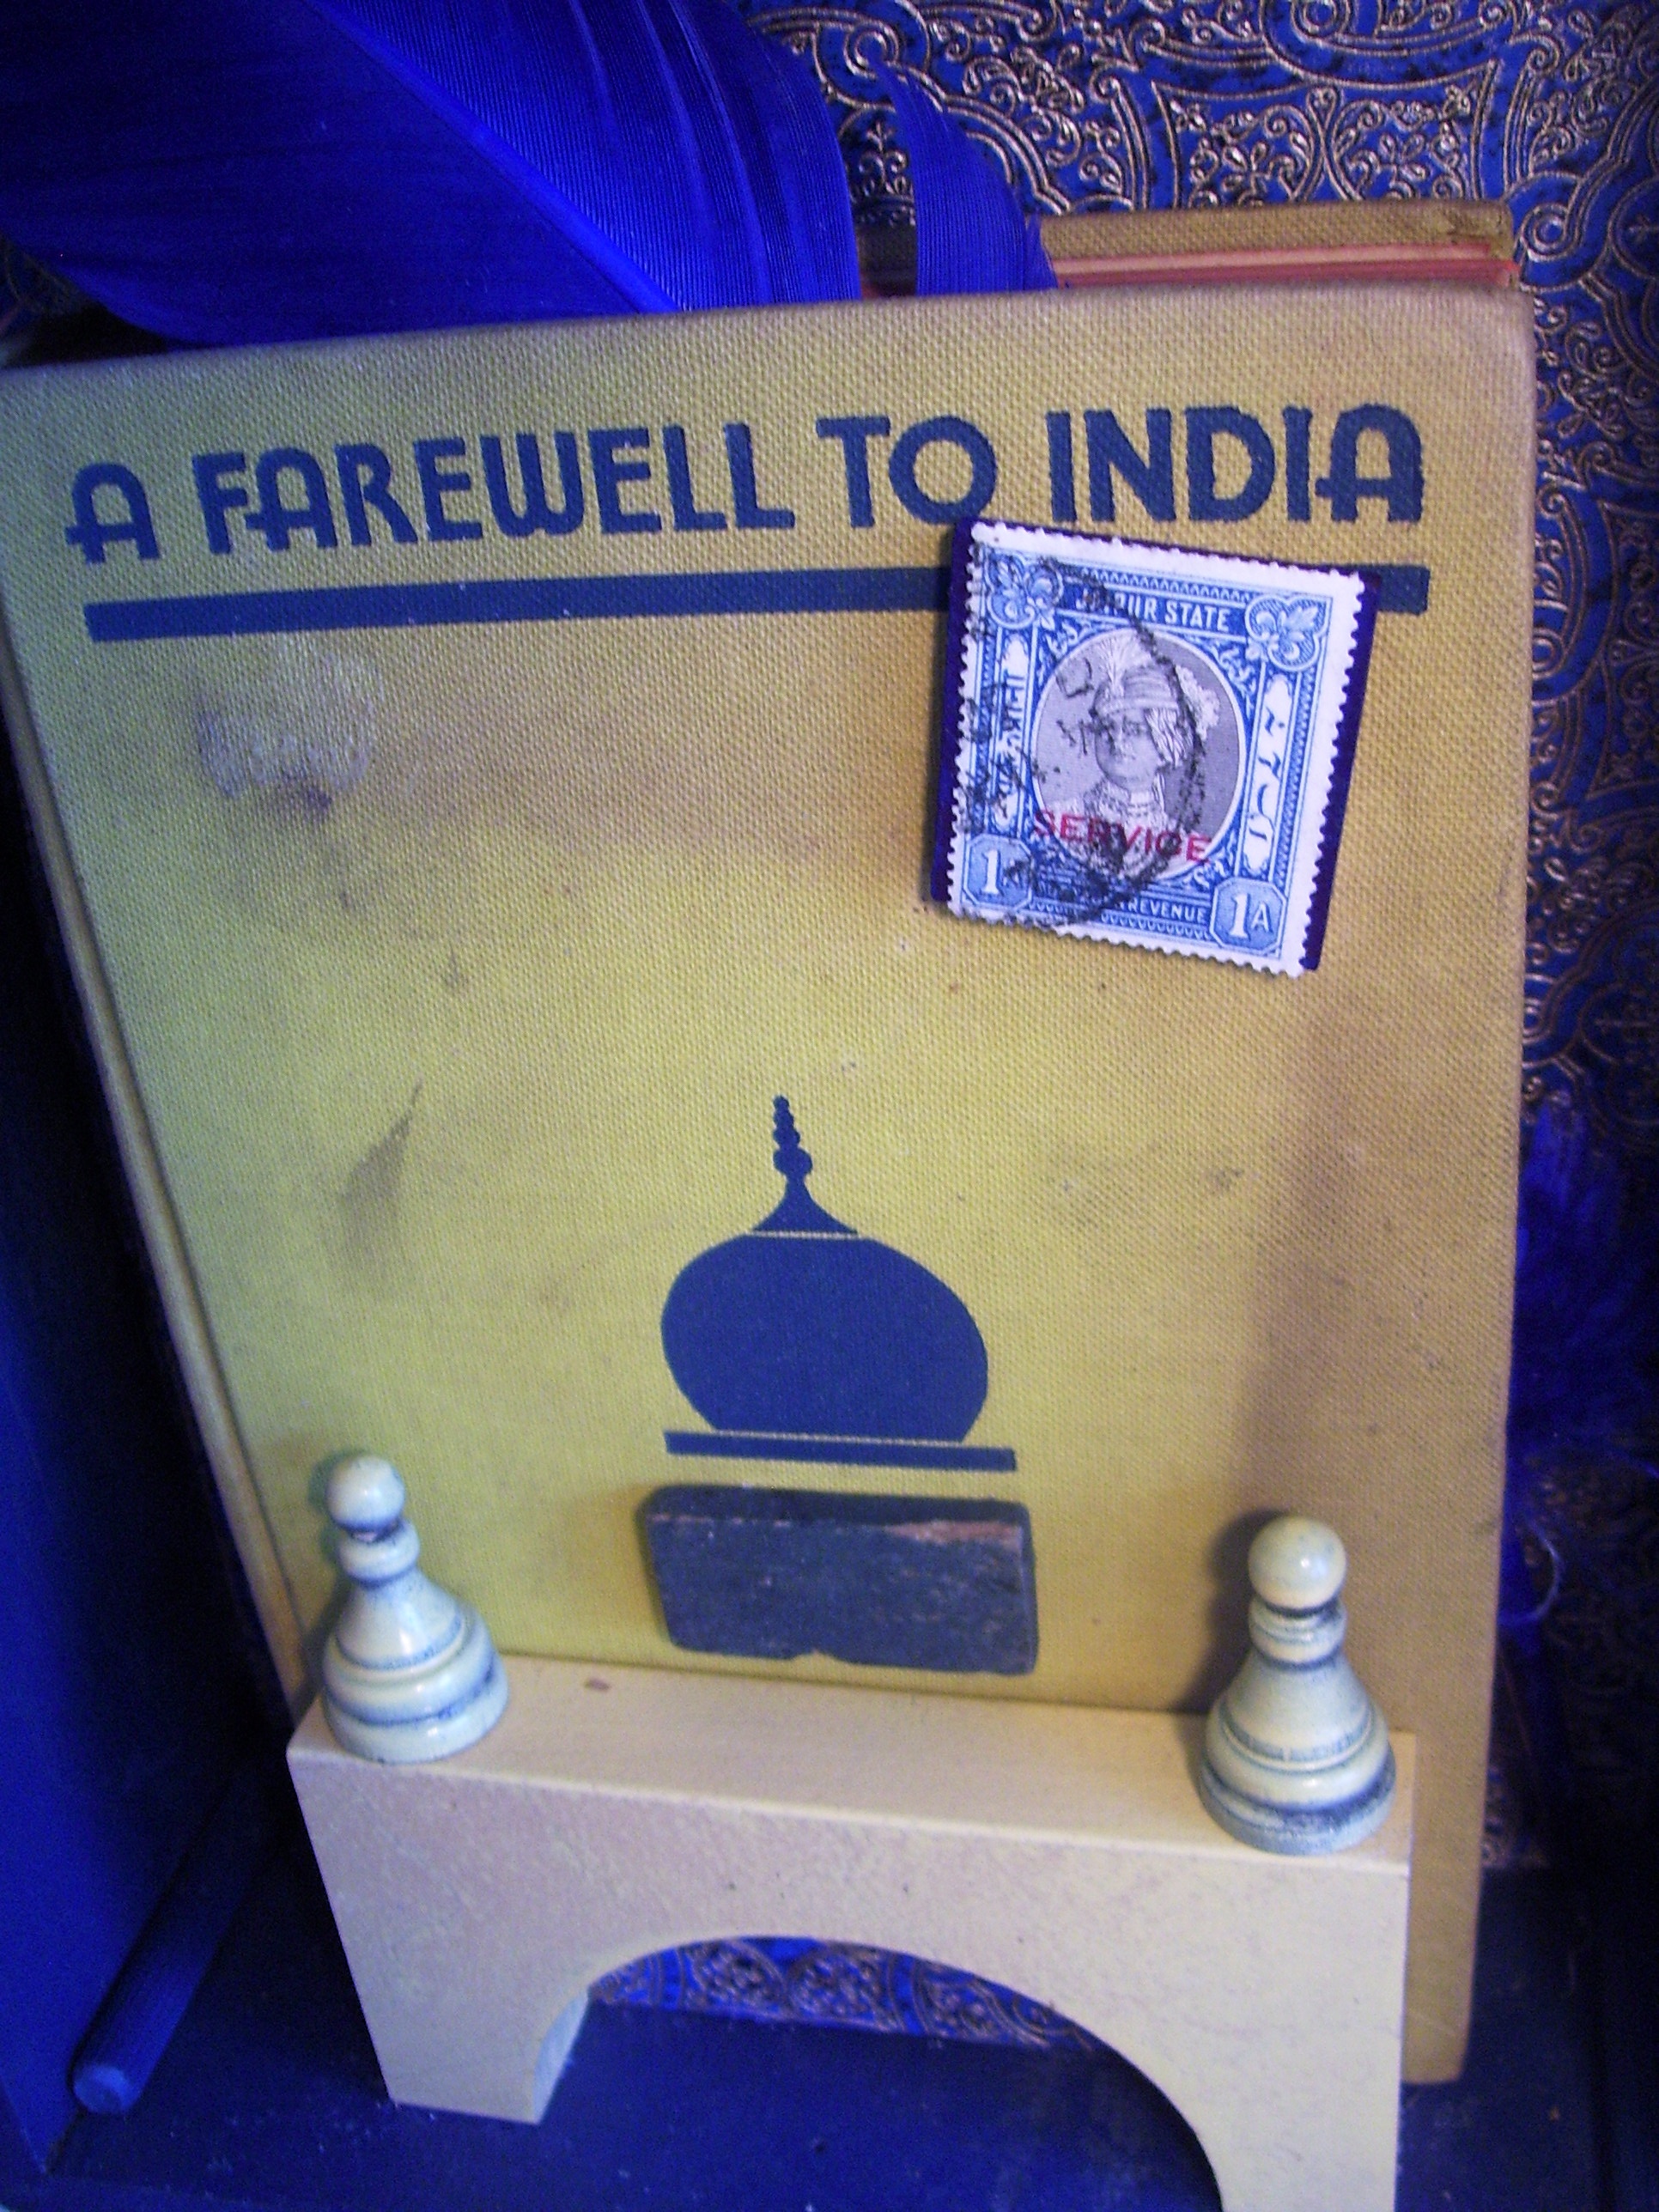 A farewell to India